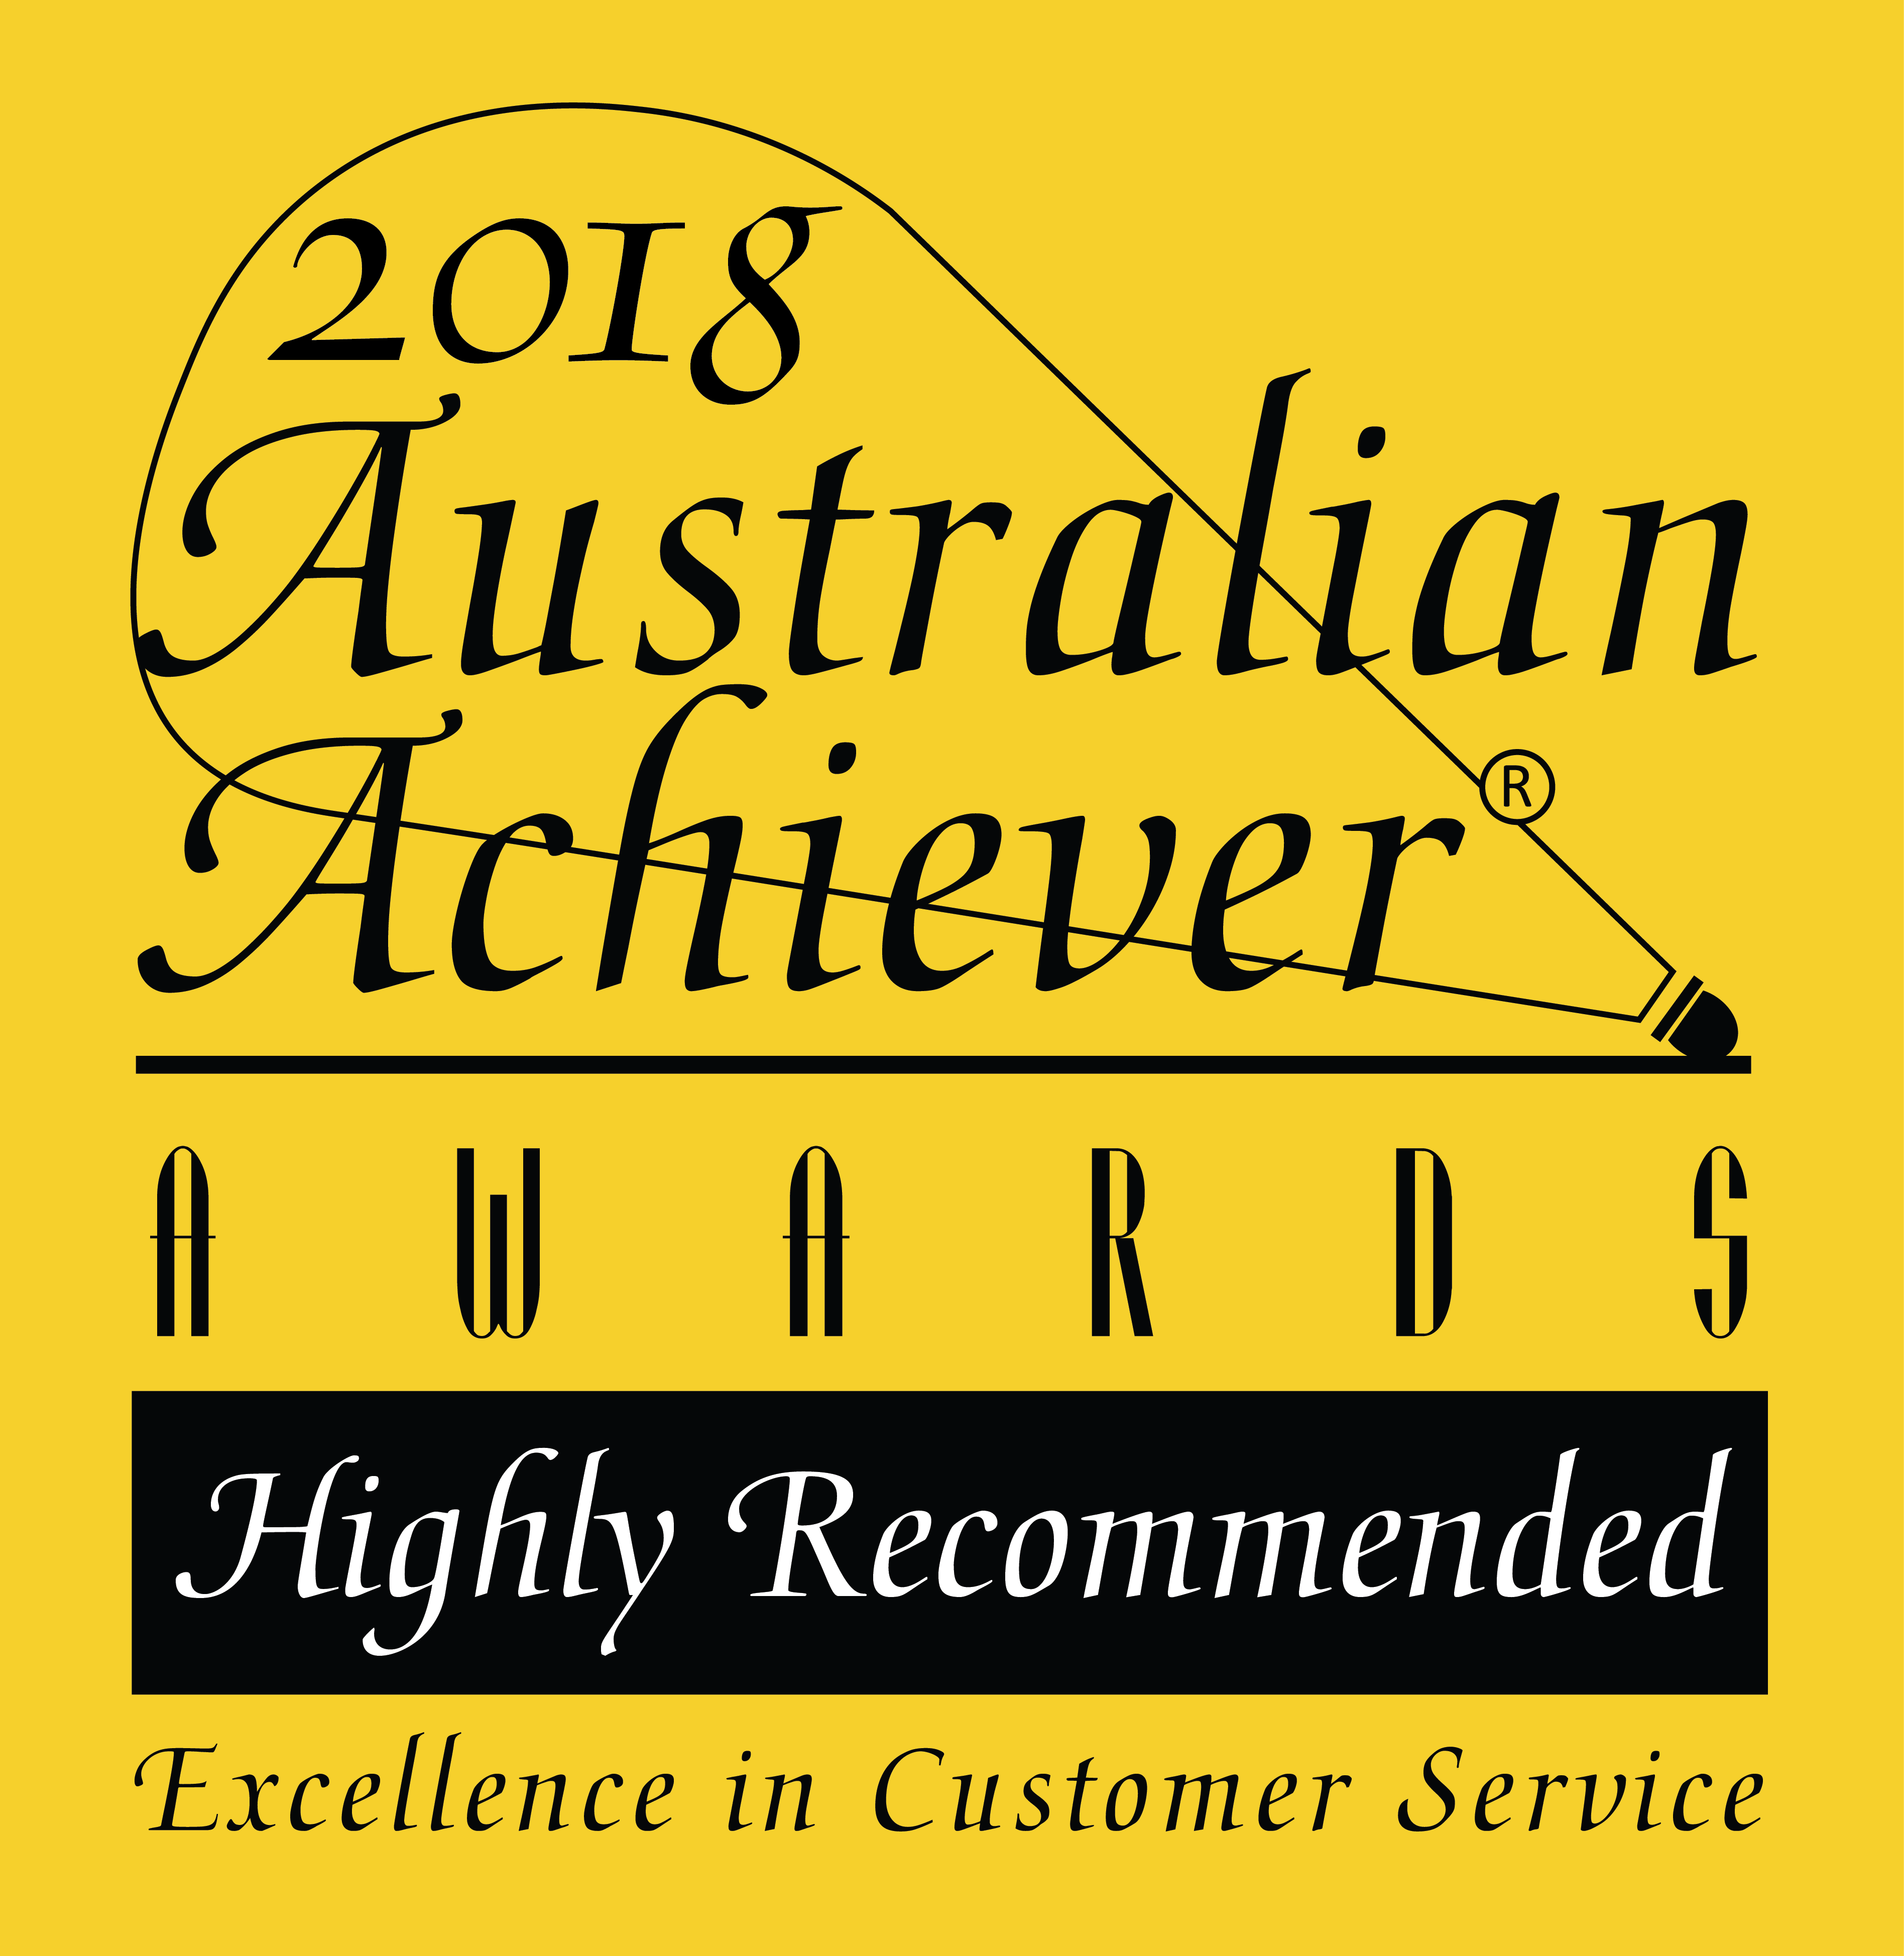 2018 Australian Achievers Awards - Highly Recommended